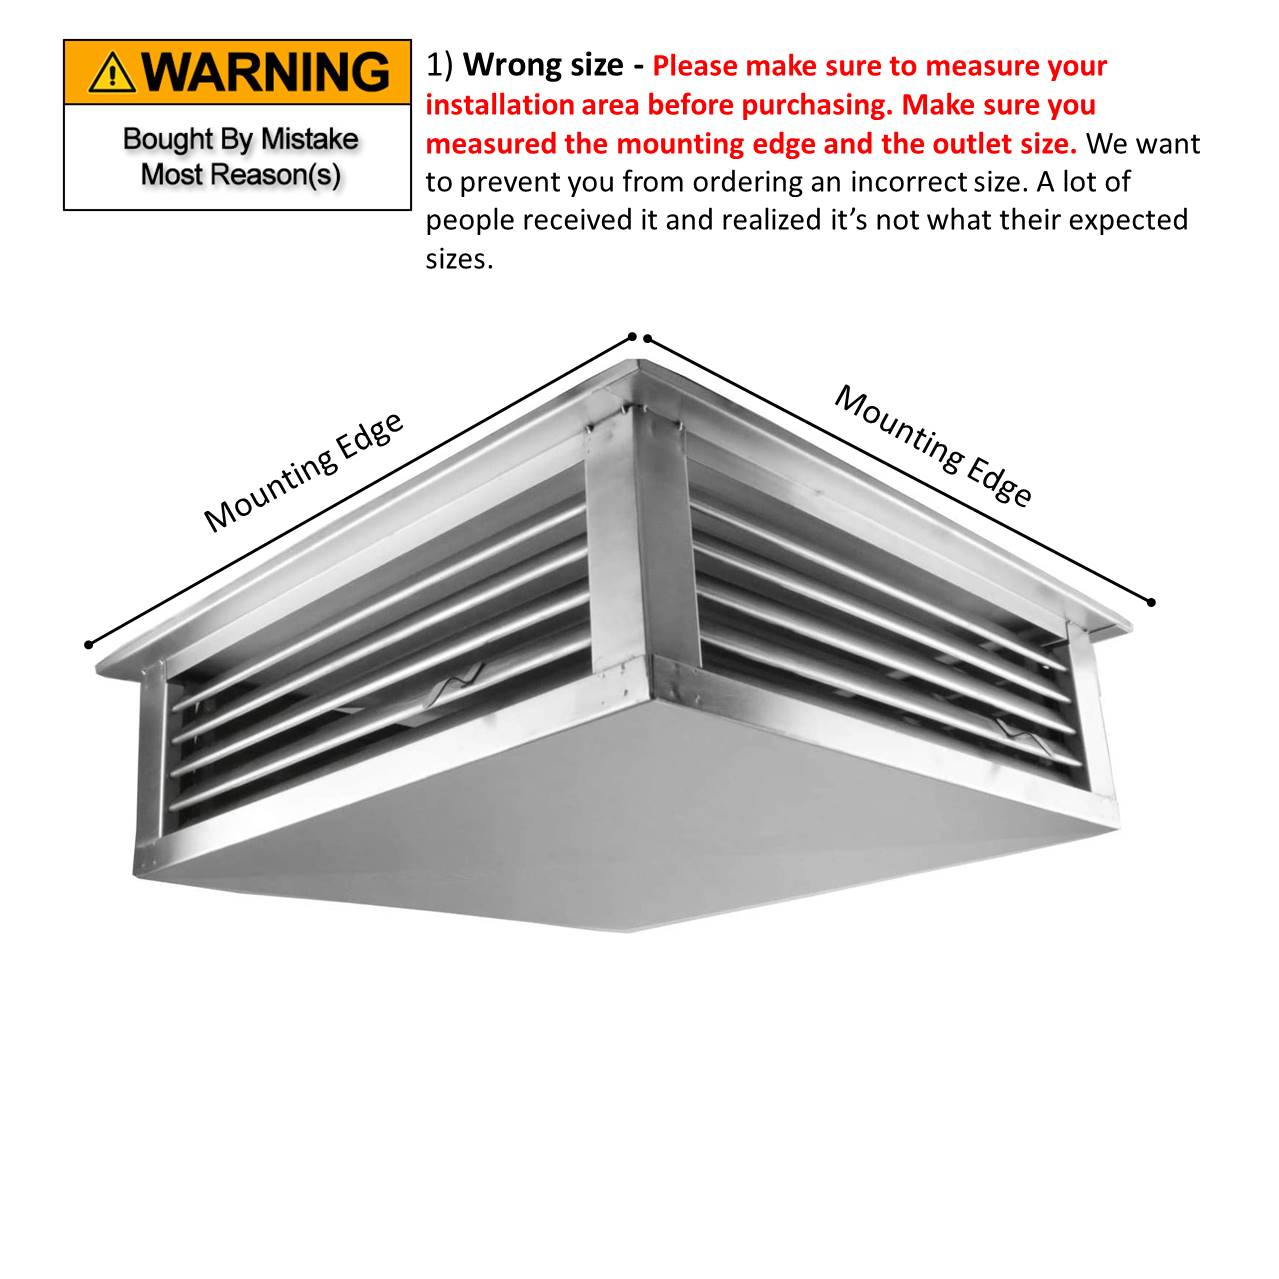 GSW 20” Stainless Steel 4-Way Adjustable Air Diffuser for Evaporative Swamp Cooler, 22” Mounting Edge (20"x20"x6")